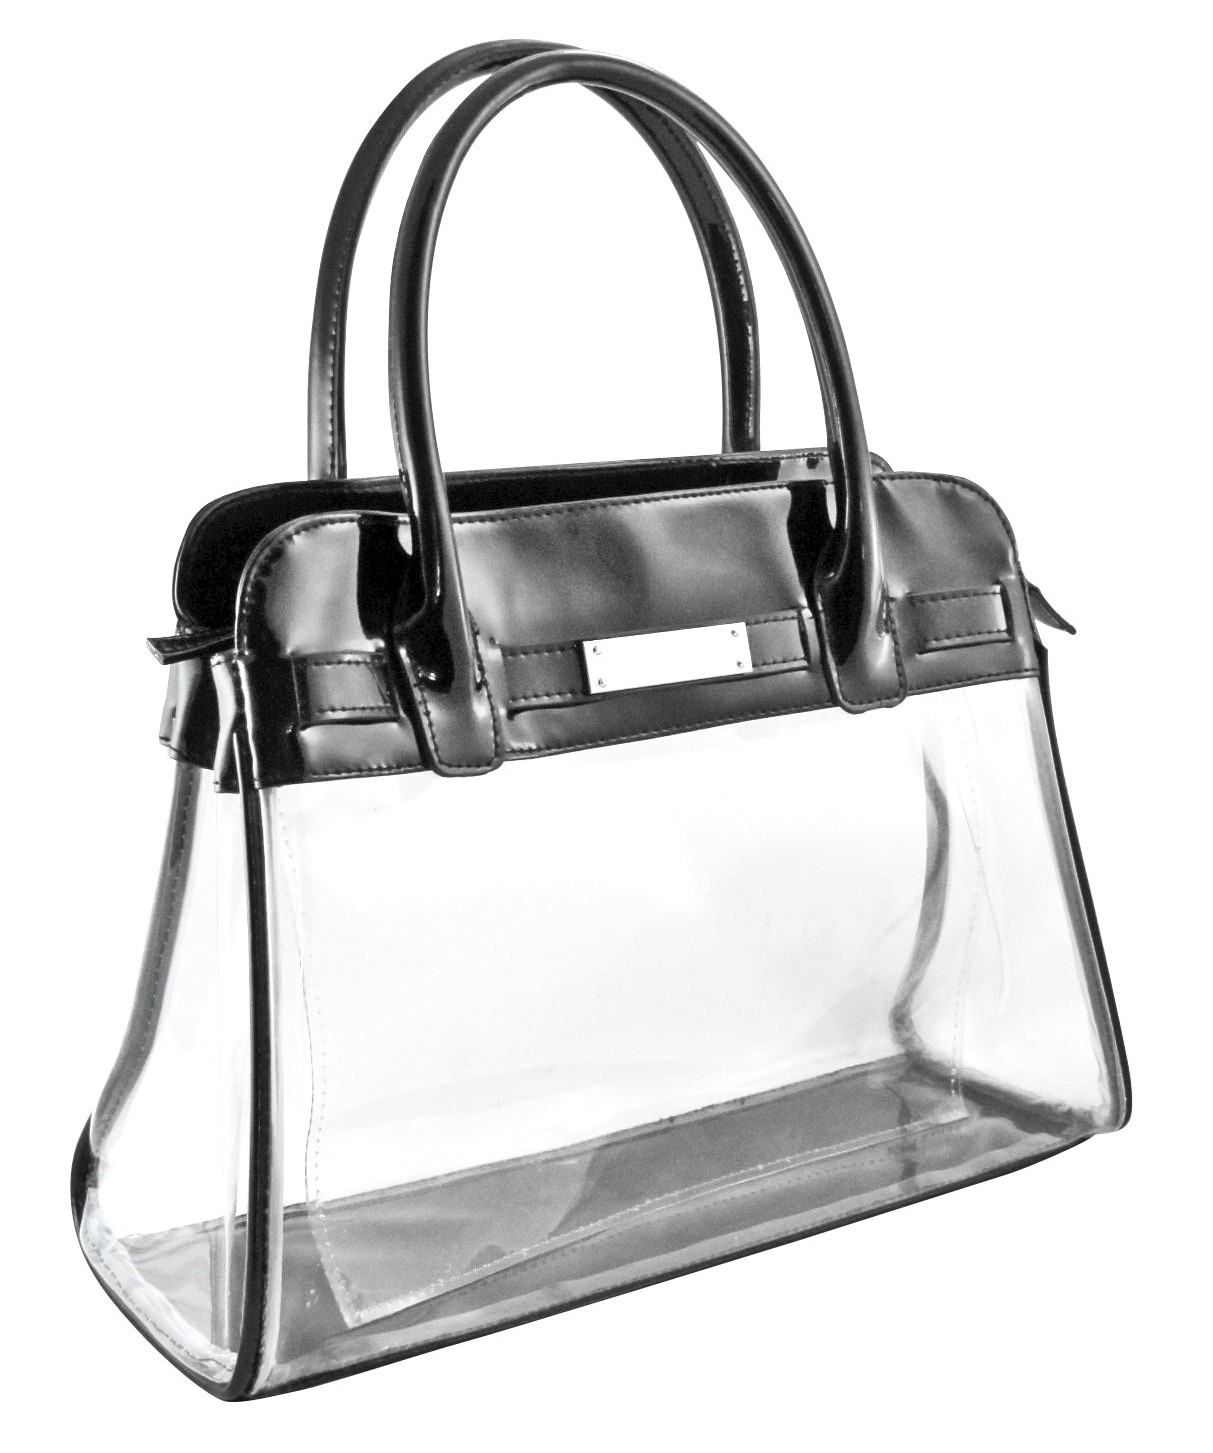 ... Measures Increase, Clear Handbags and More Fills A Fashion Niche